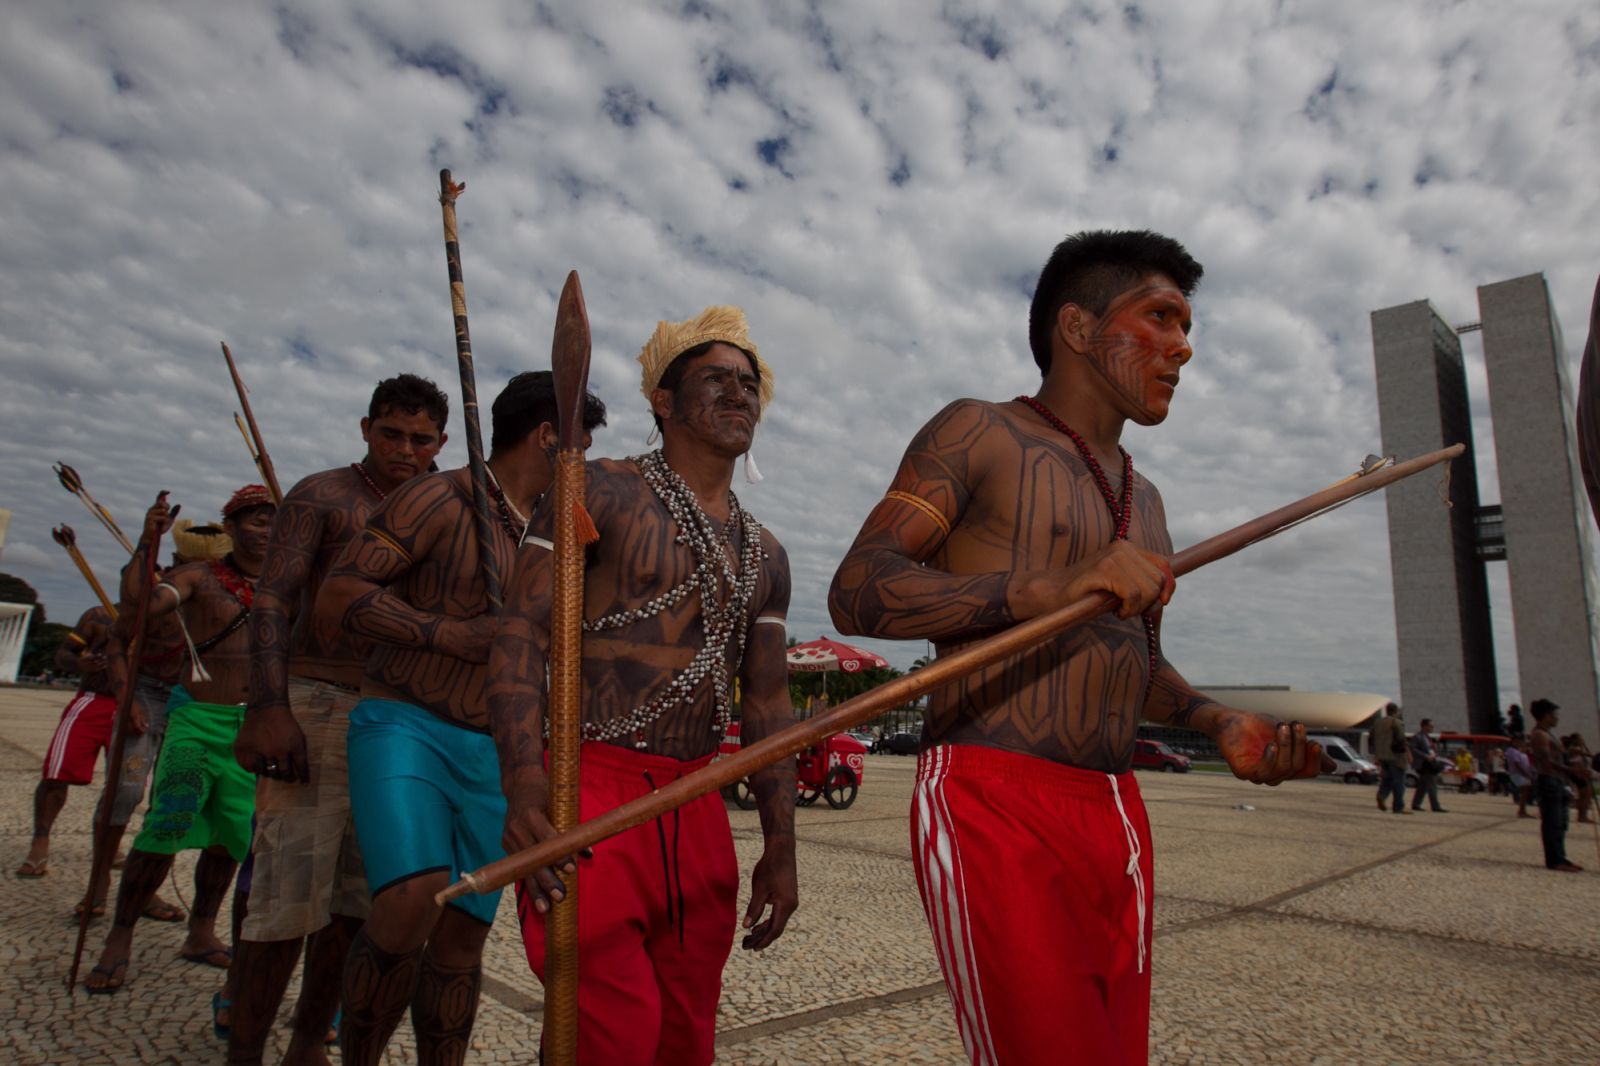 Indigenous people rallying against an infrastructure project in Brasília in 2013.